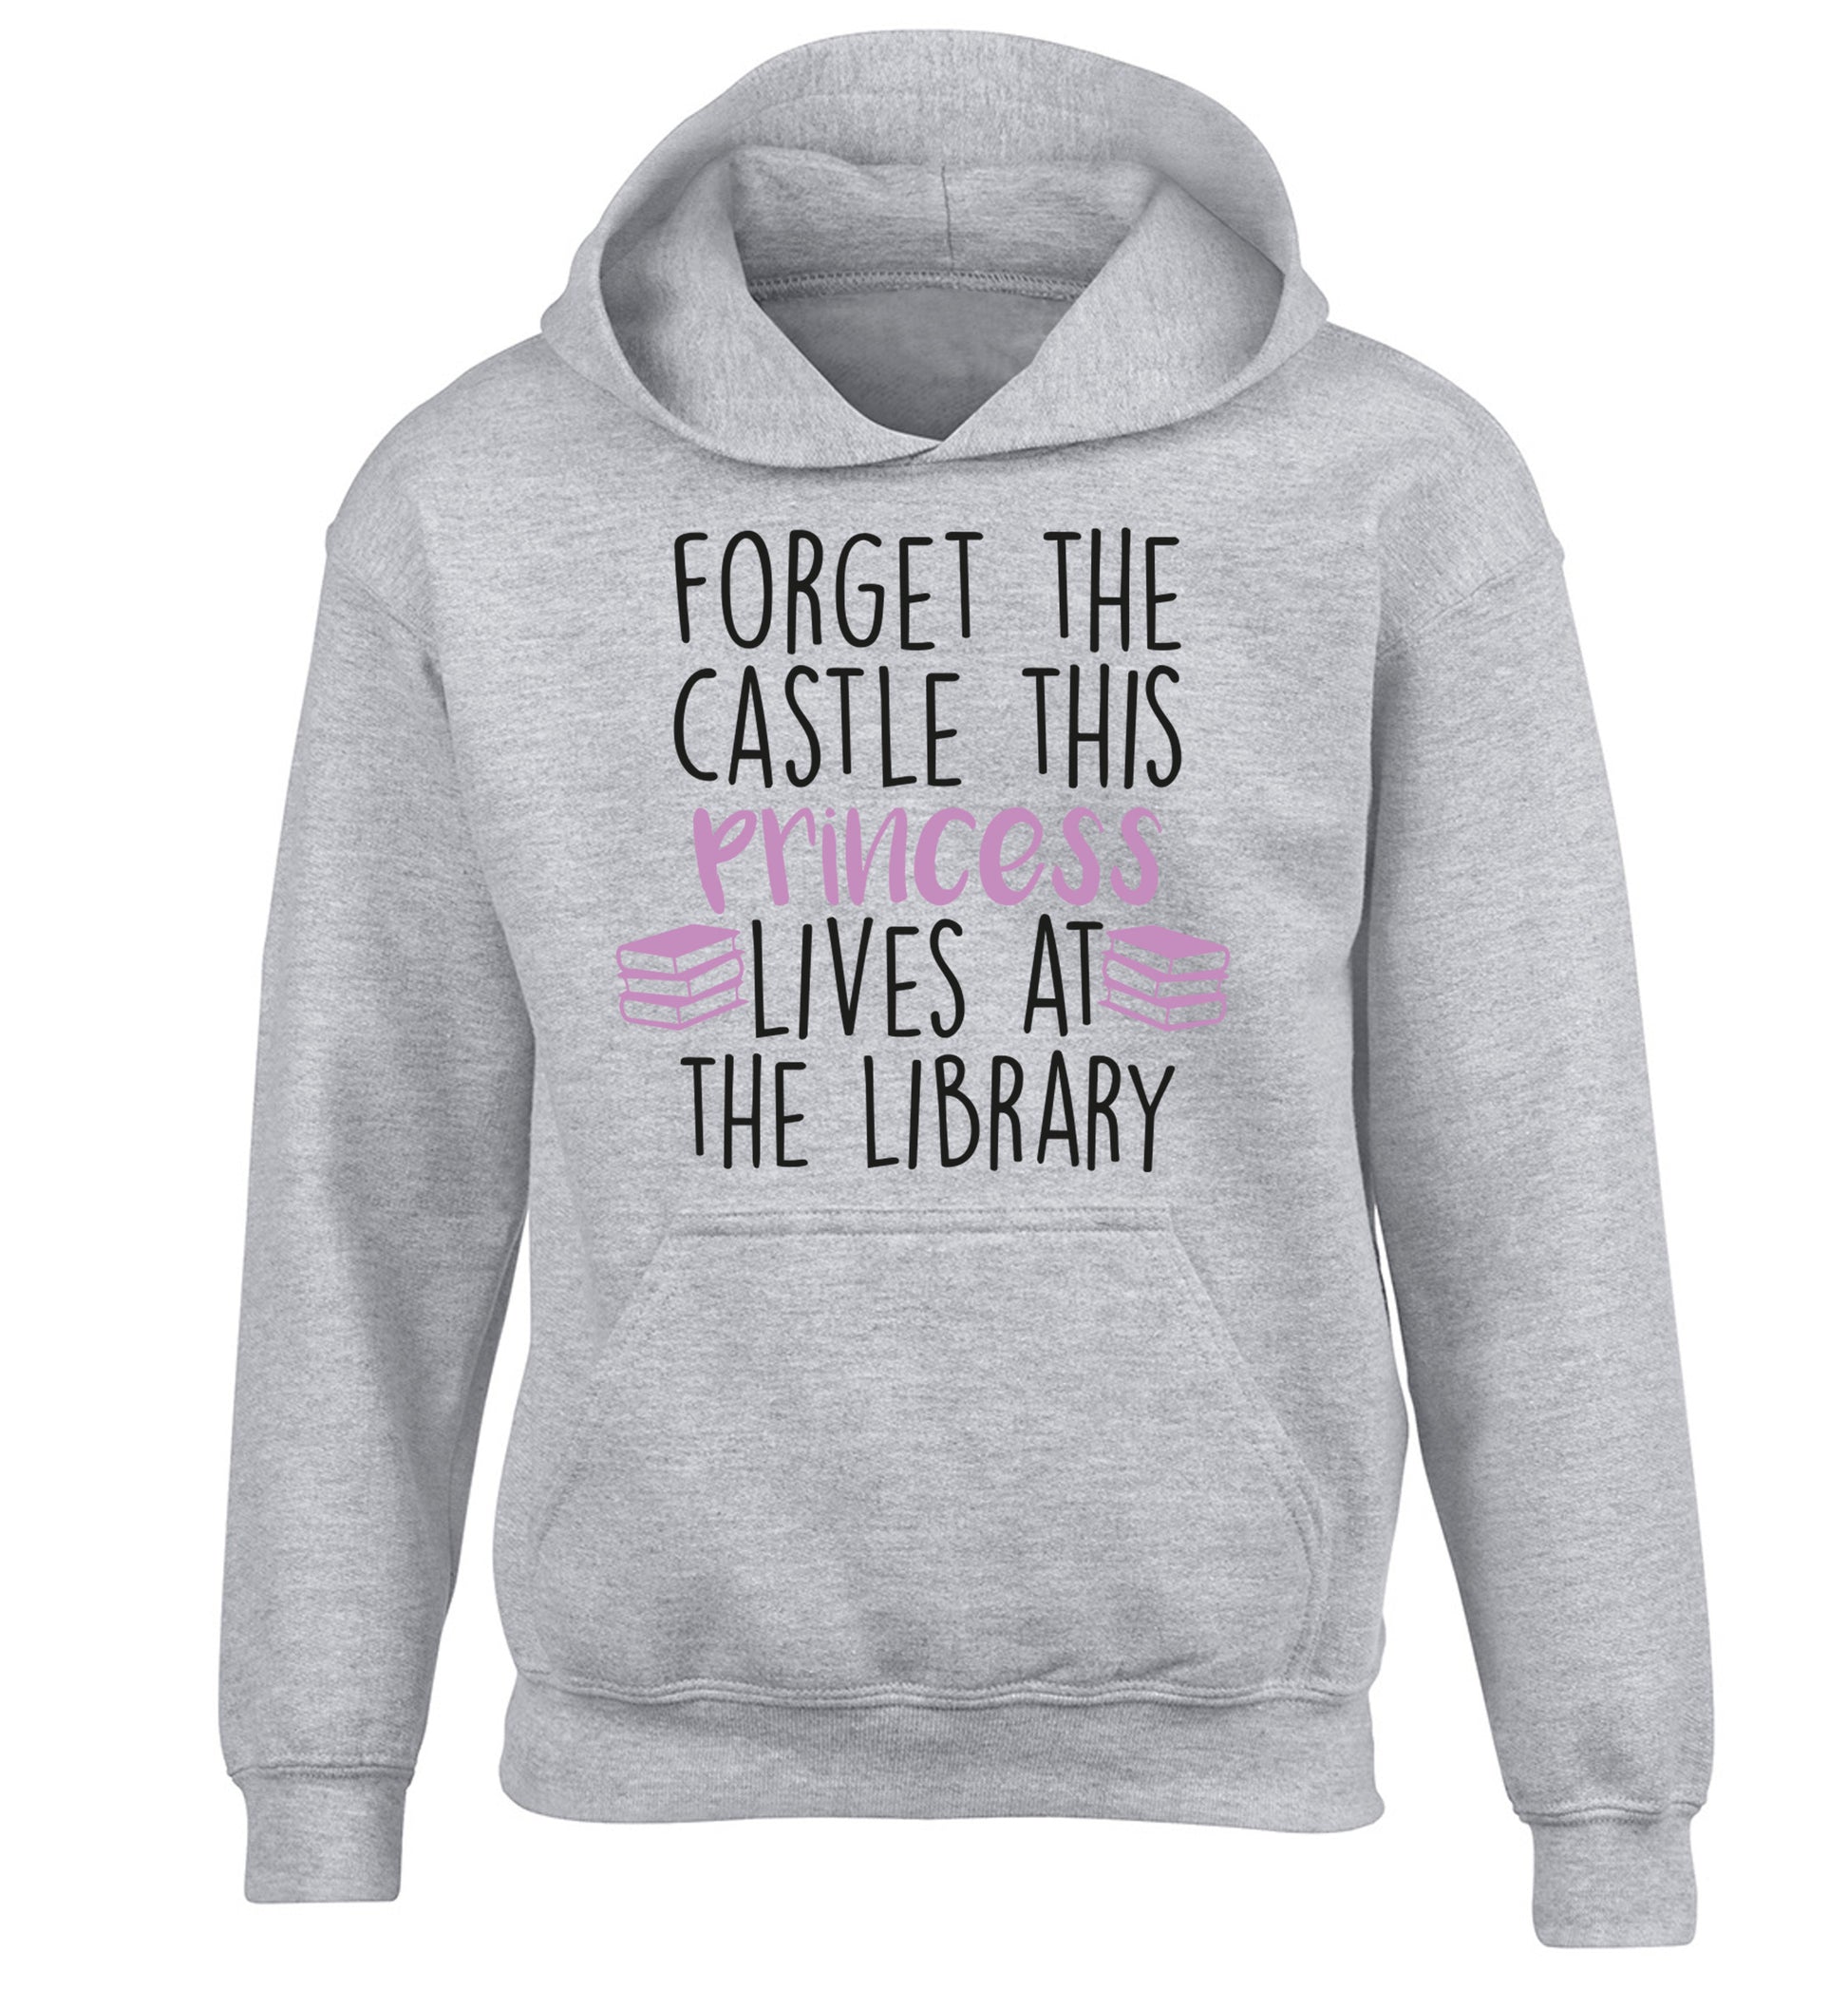 Forget the castle this princess lives at the library children's grey hoodie 12-14 Years